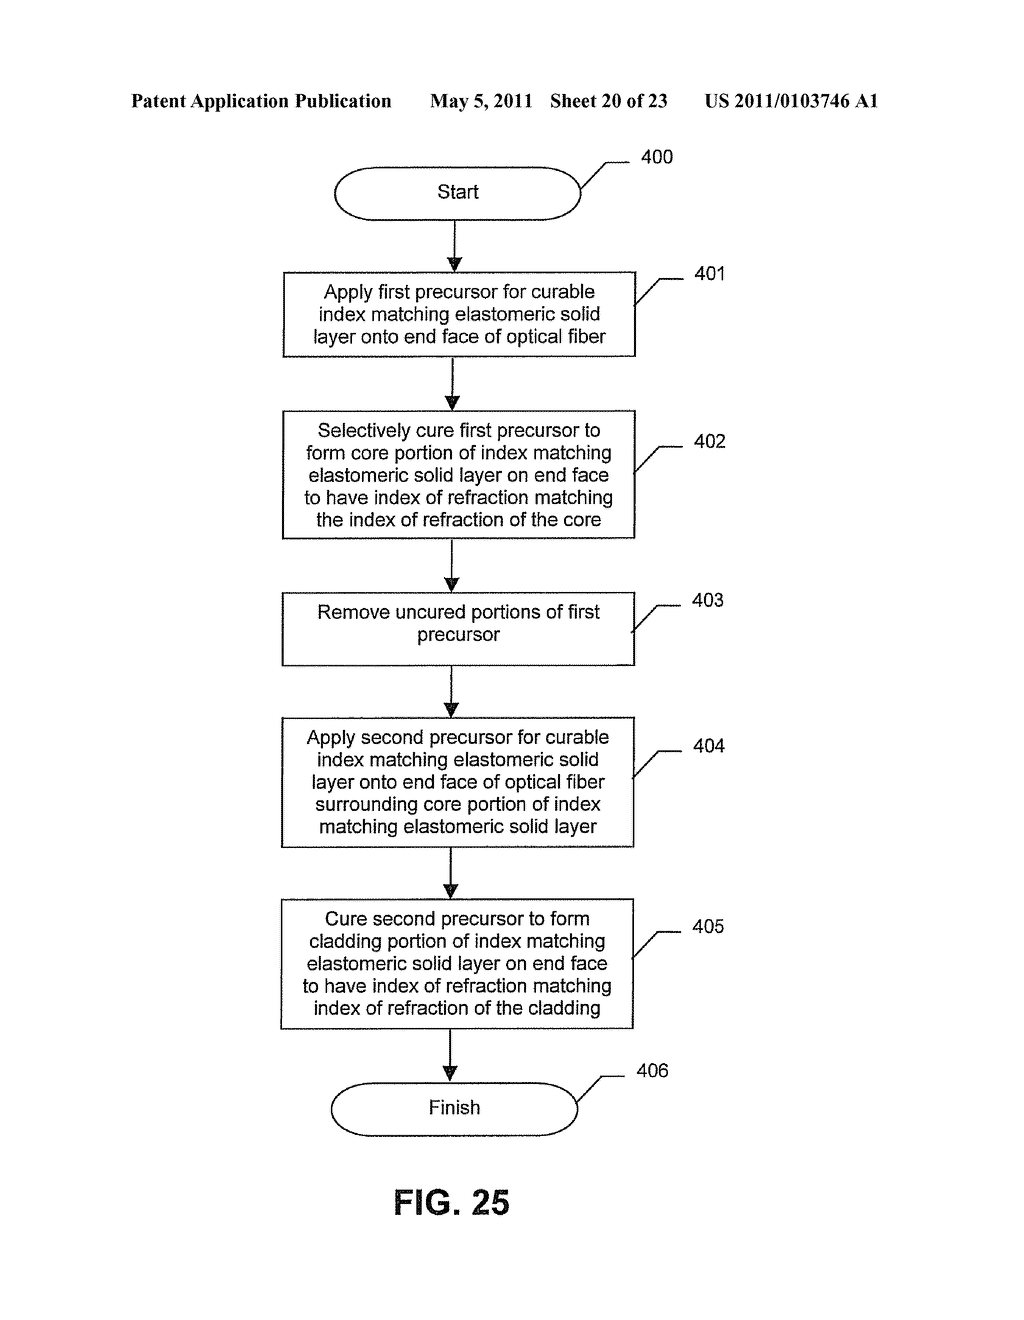 REPEATABLE OPTICAL WAVEGUIDE INTERCONNECTION INCLUDING AN INDEX MATCHING ELASTOMERIC SOLID LAYER PROVIDING CORE AND CLADDING INDEX OF REFRACTION MATCHING AND RELATED METHODS - diagram, schematic, and image 21